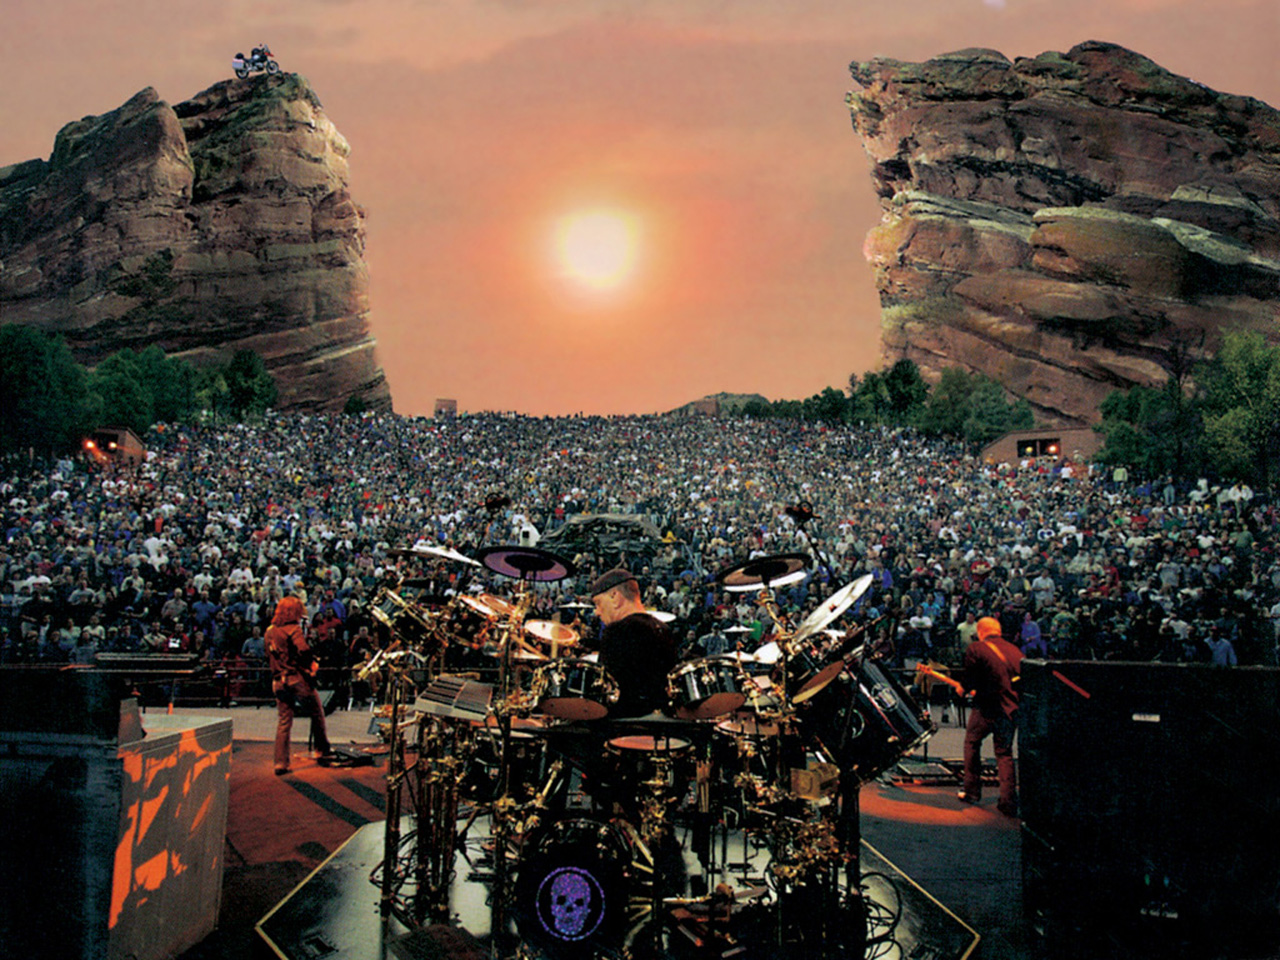 Red Rocks Amphitheater Concert at Sunset